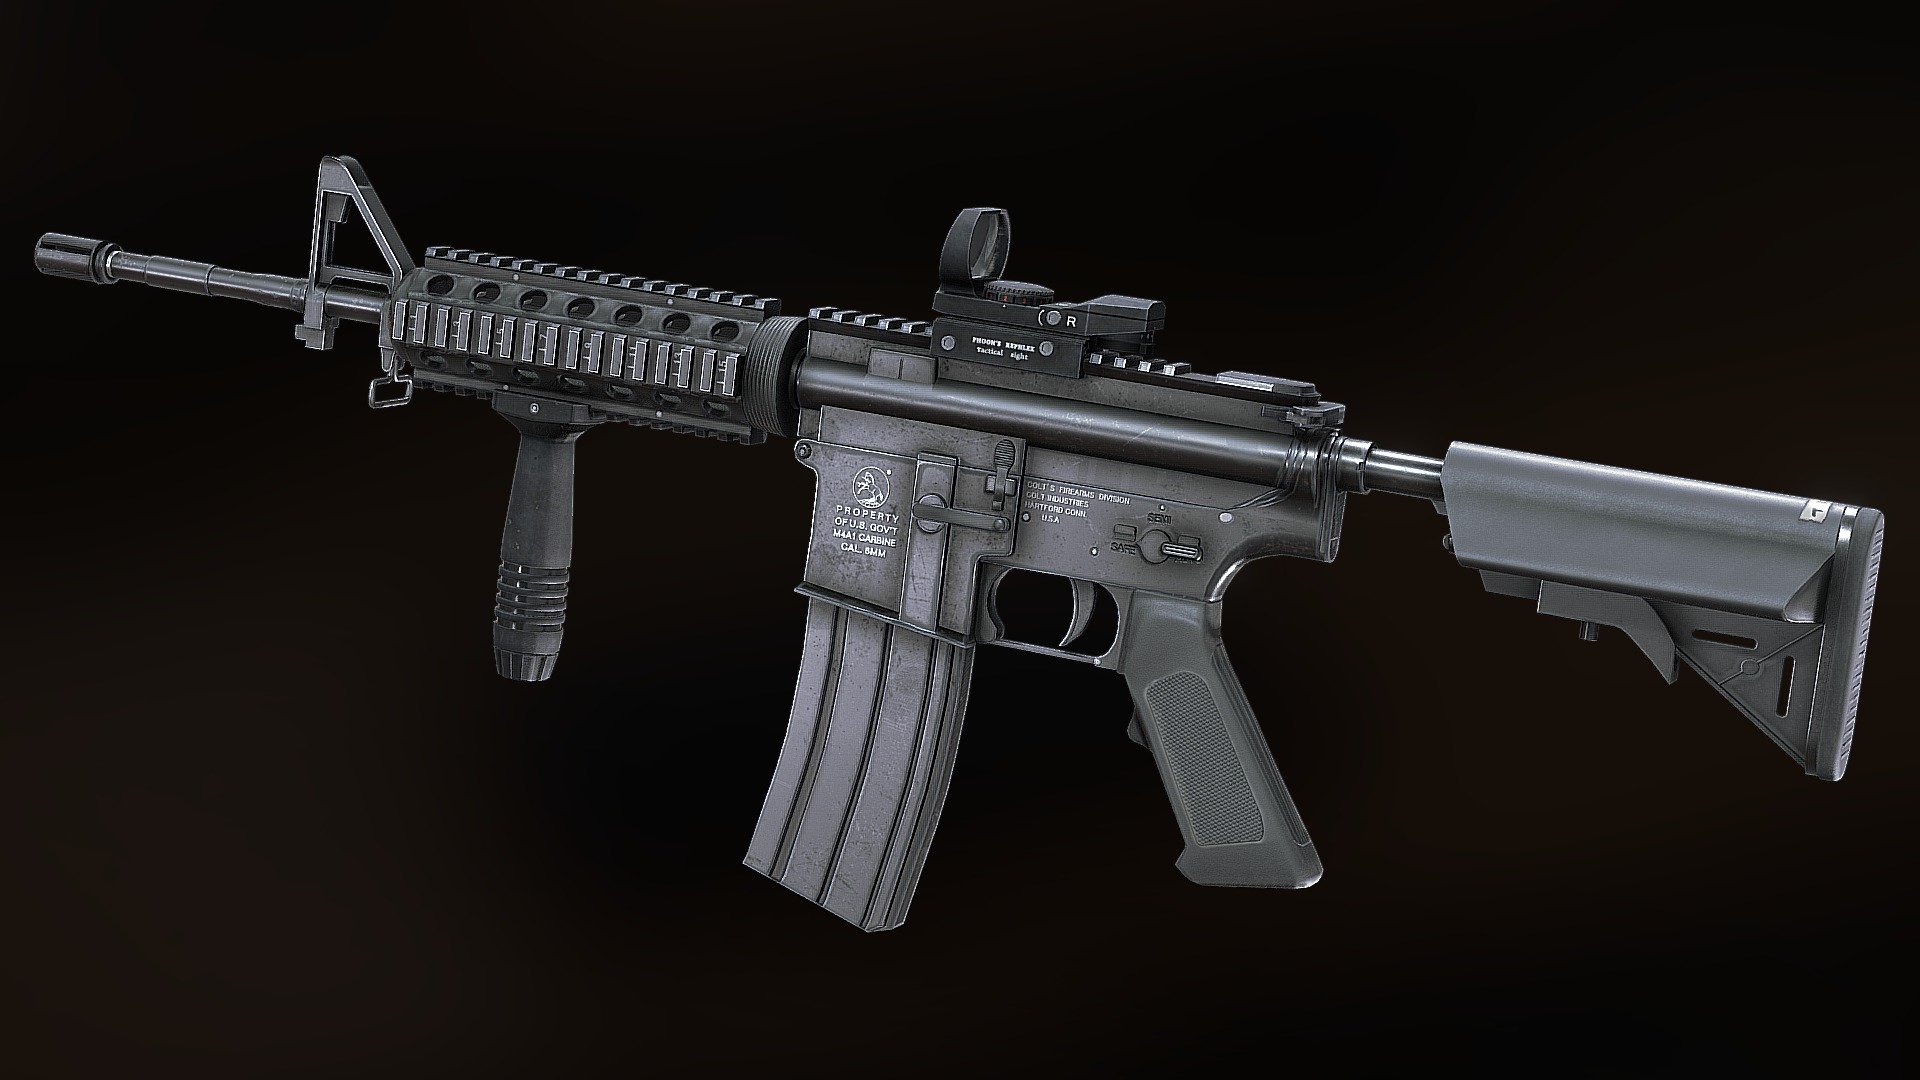 Updated version of my old M4A1. Shapes are a little better than the previous version which resembled a paint ball gun by mistake. Whoopsi 3d model